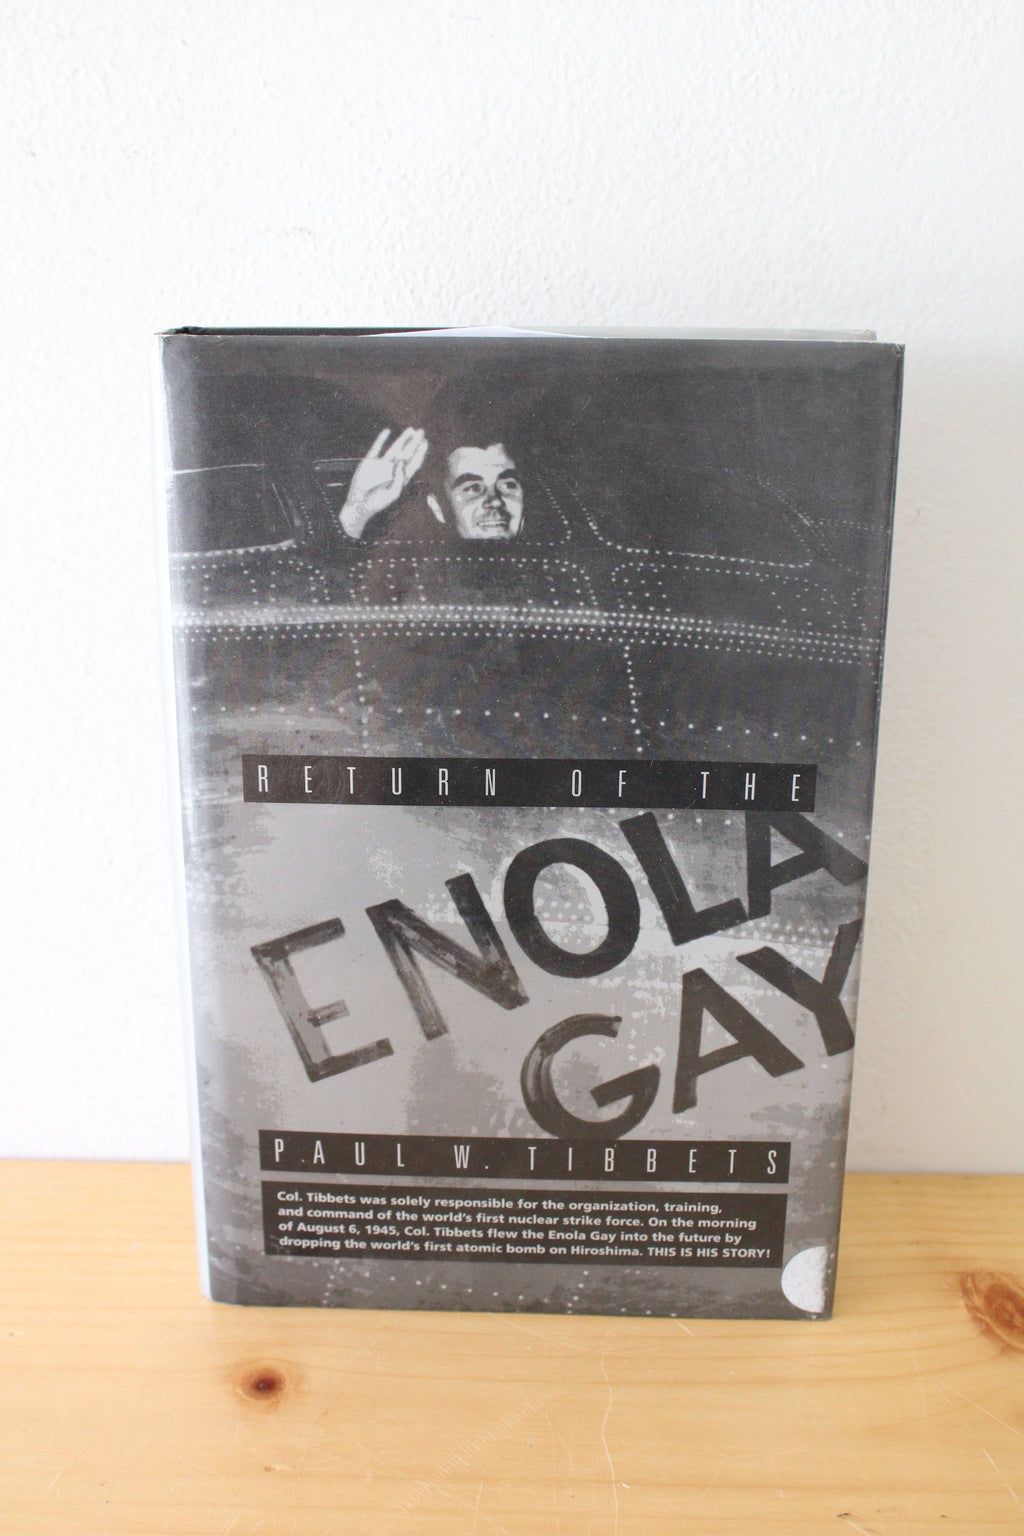 Return Of The Enola Gay By Paul W. Tibbets (Signed Copy)